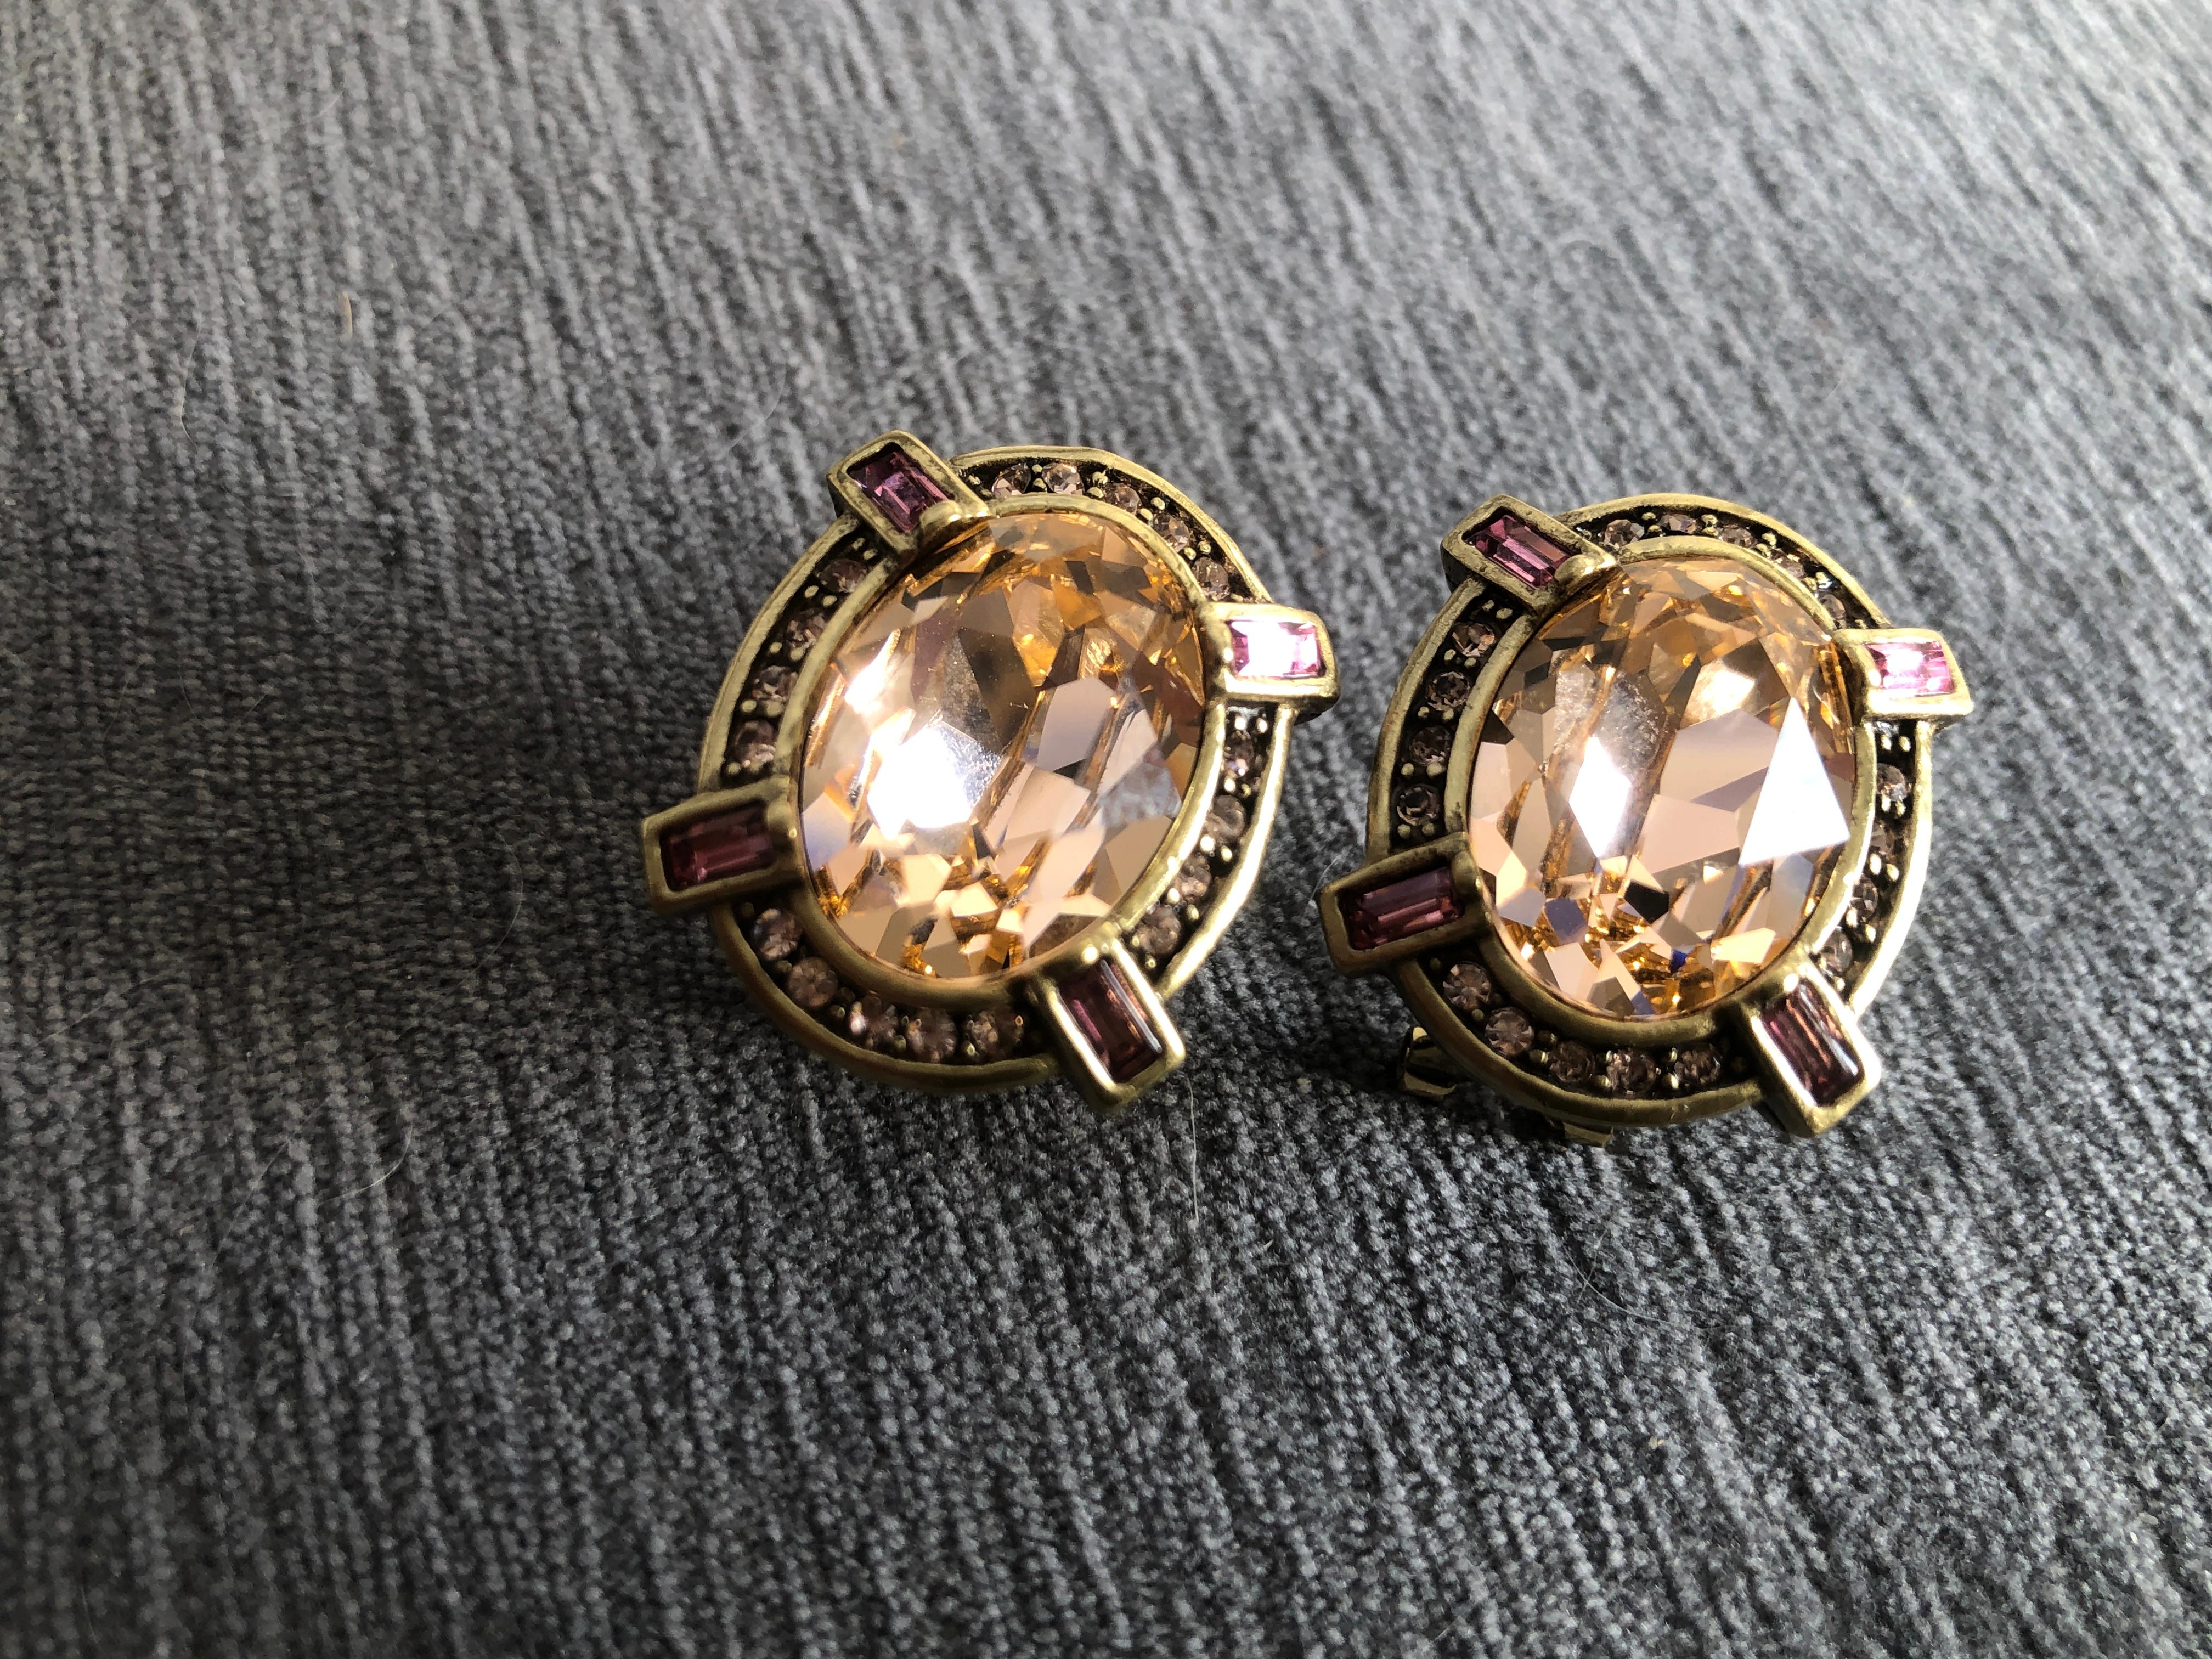 Women's Art Deco Glamorous Blush & Pink Oval Crystal Earrings by Heidi Daus Lever Pieced For Sale